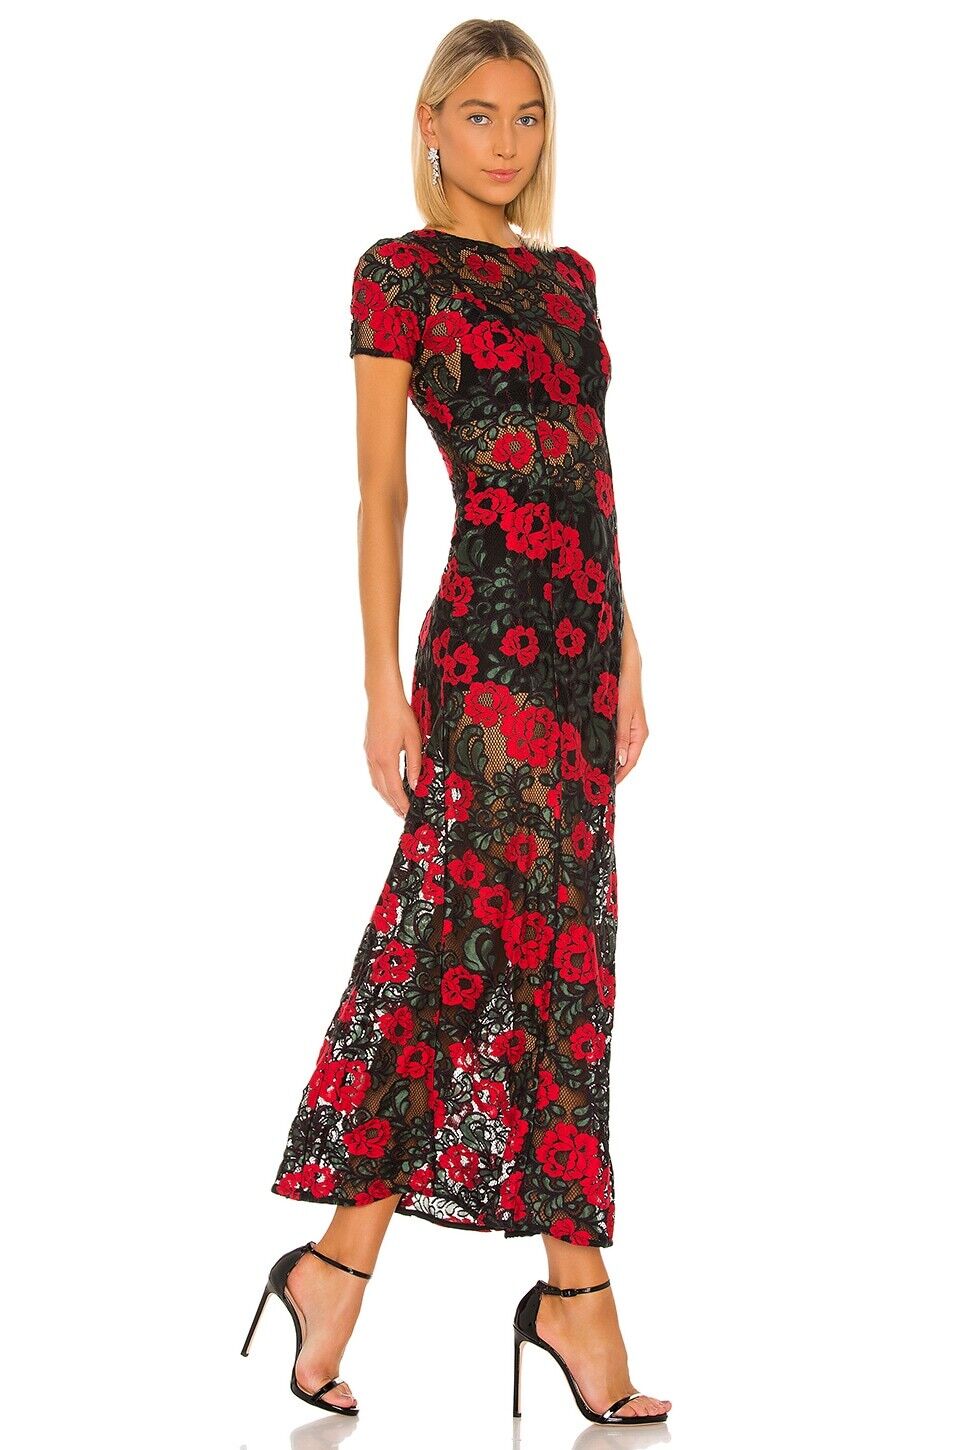 Lovers + Friends Nadine Maxi Dress in Rose Garden - Sheer Lace Fabric